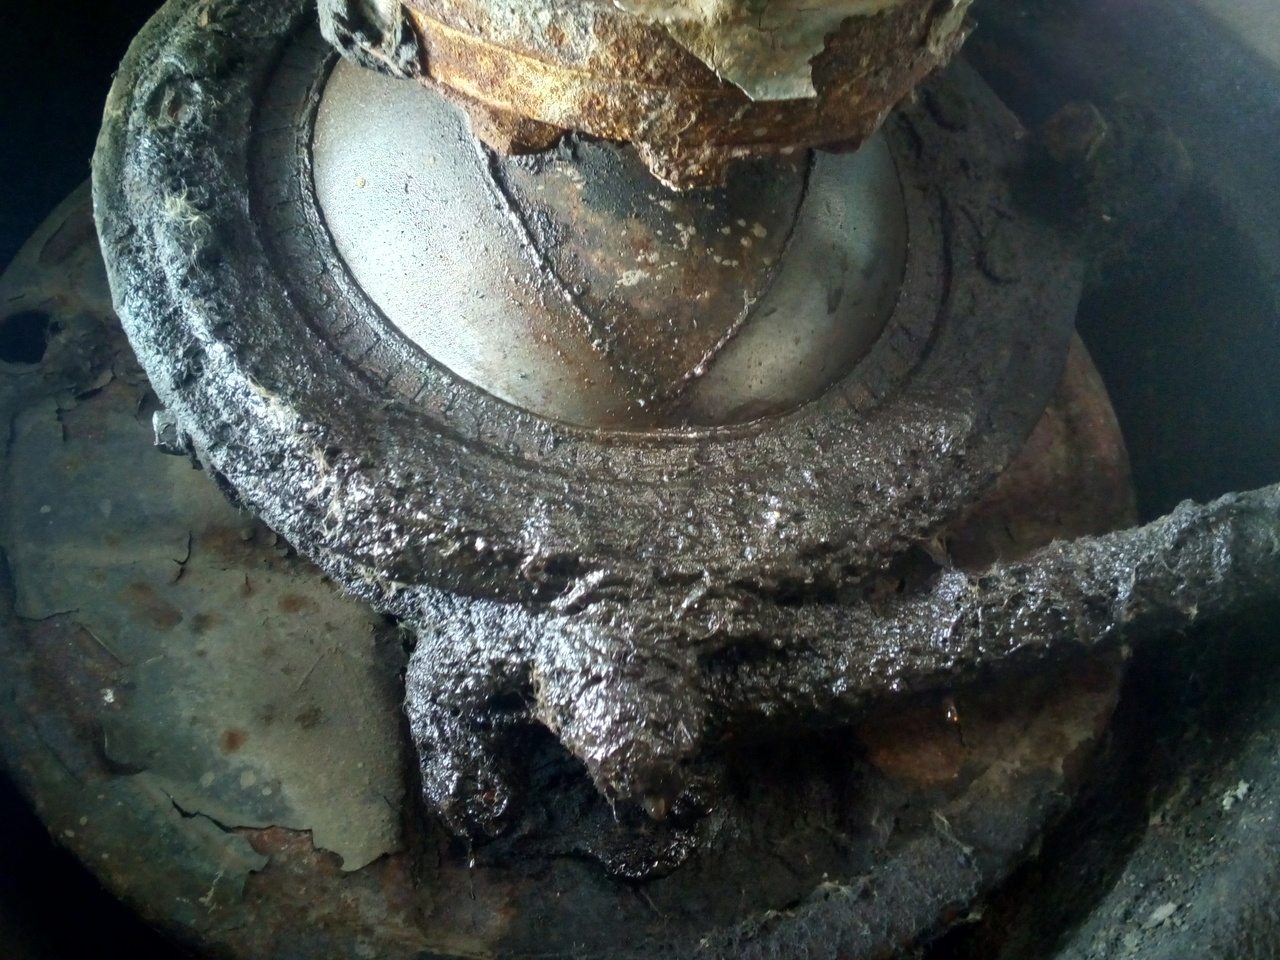 The view under the offside front swivel joint, which is a big
slimy mess of leaking oil and dirt.